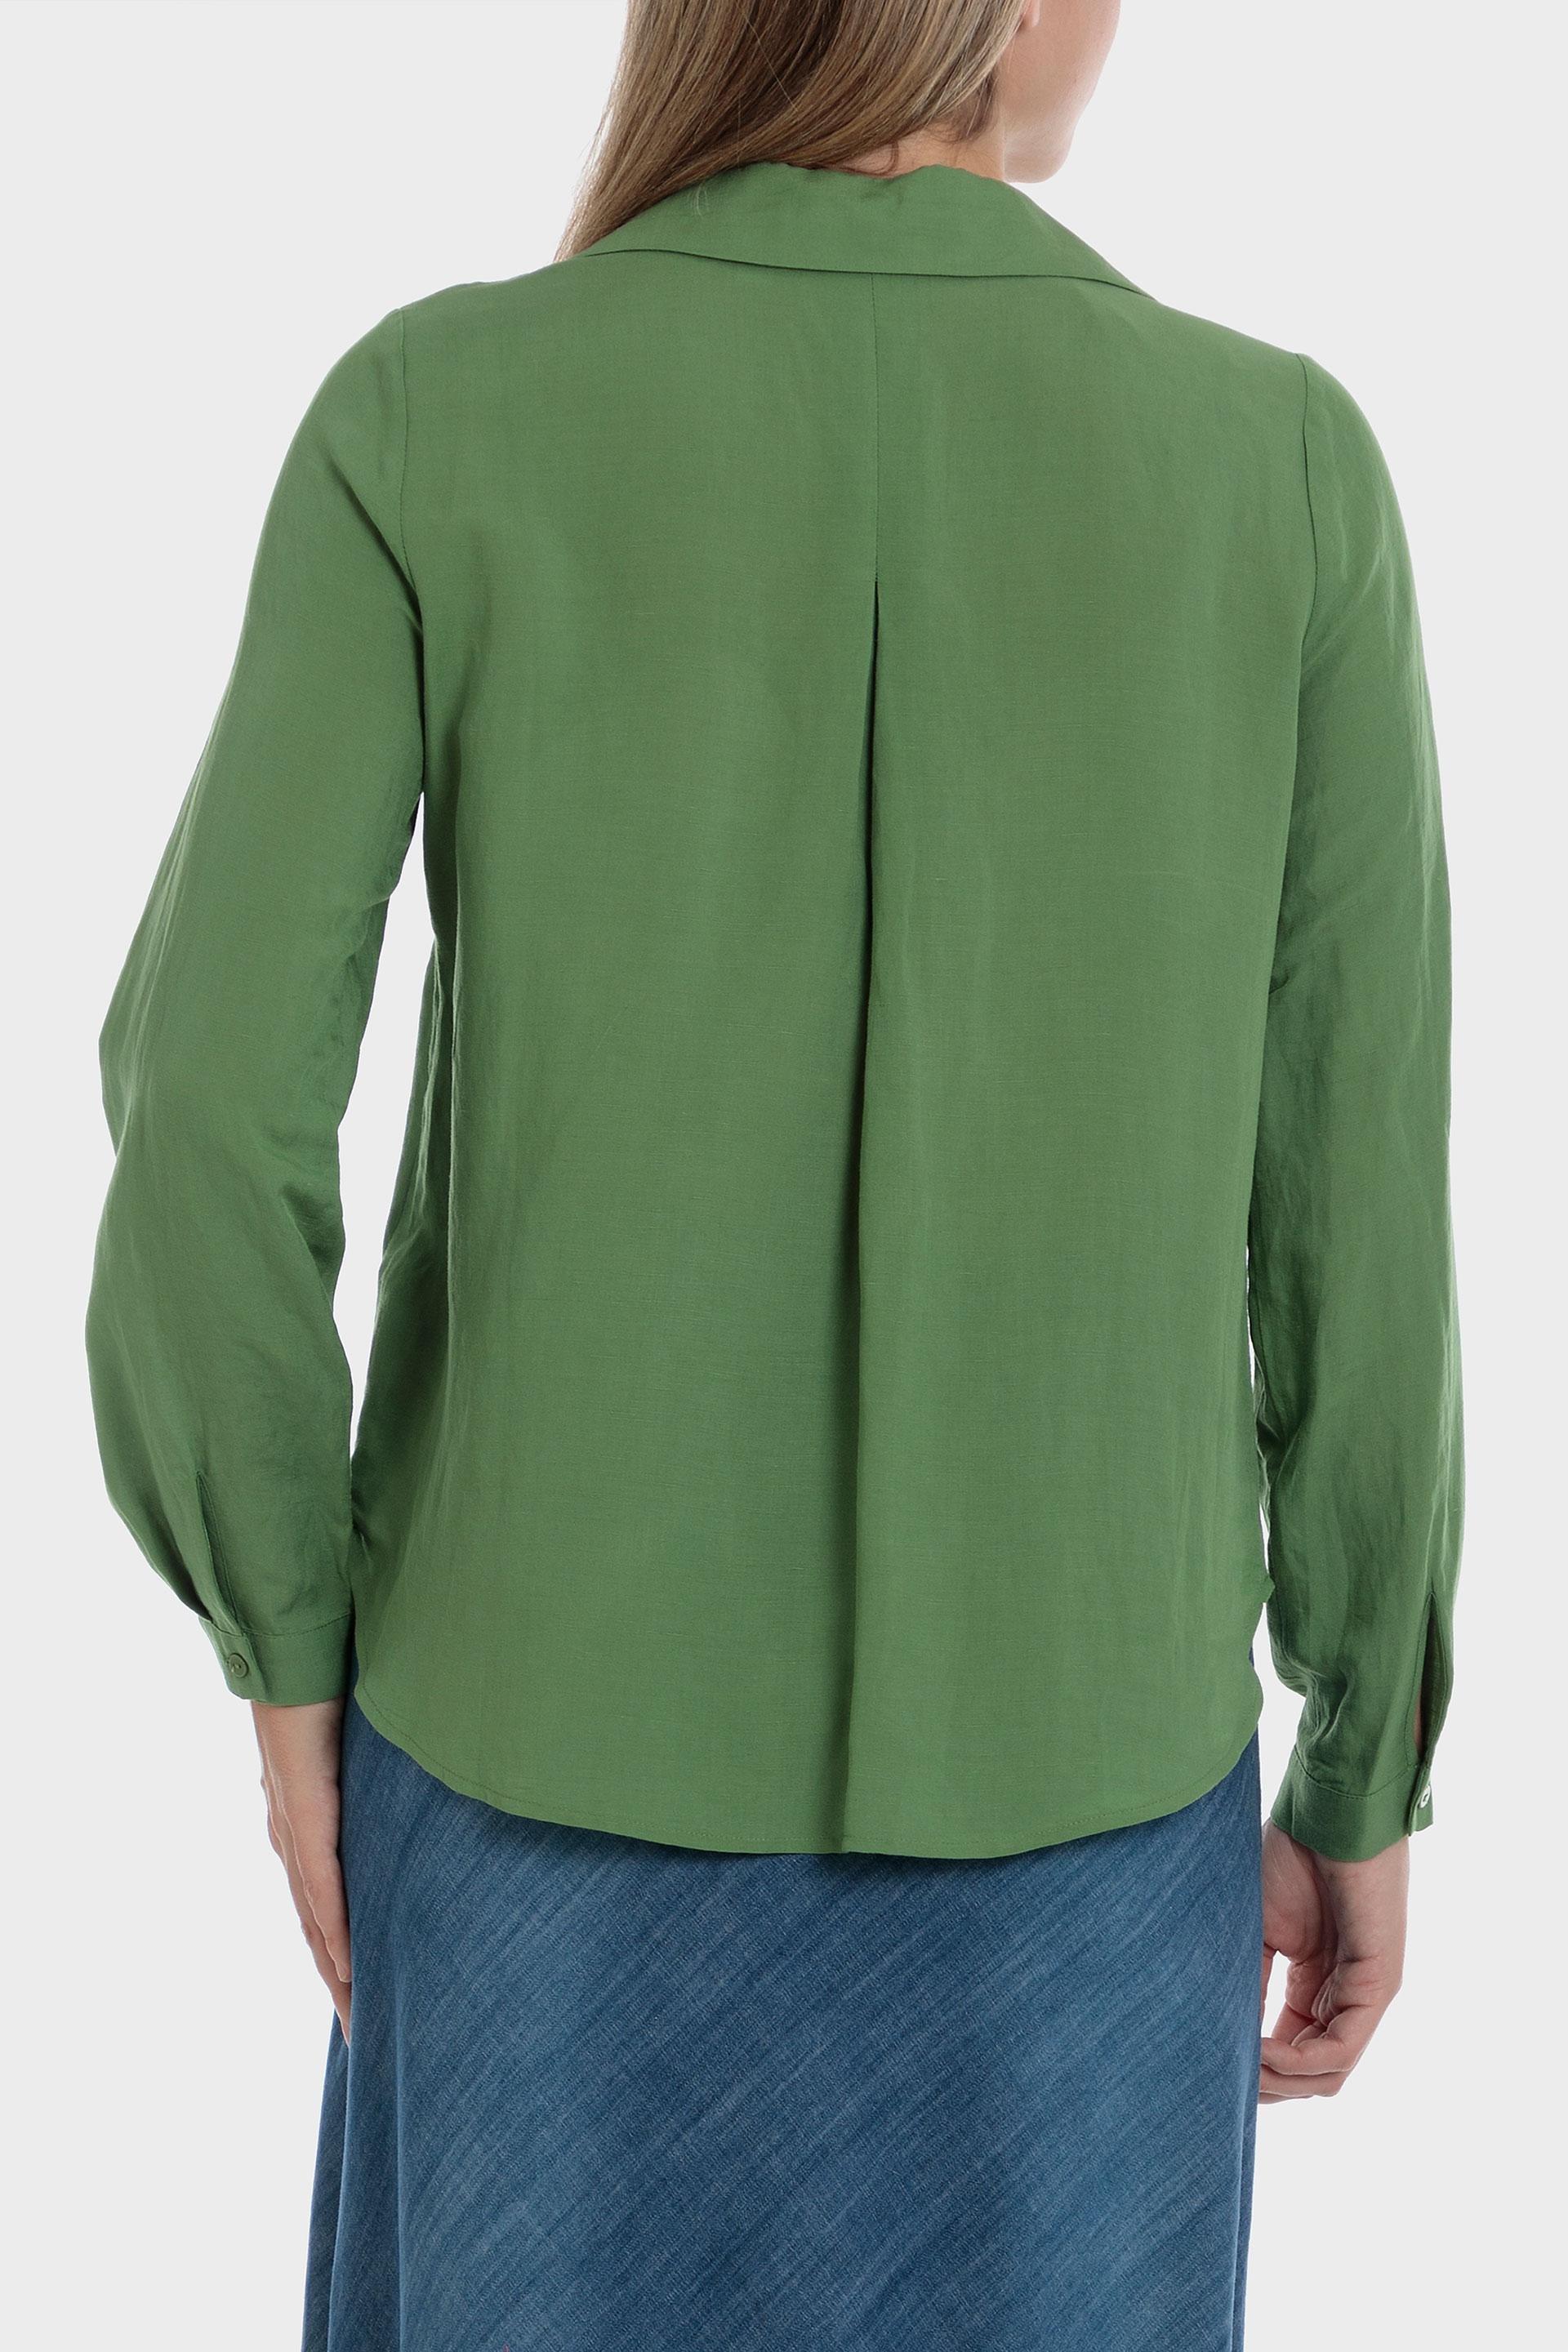 Punt Roma - Green Loose Fitting Blouse